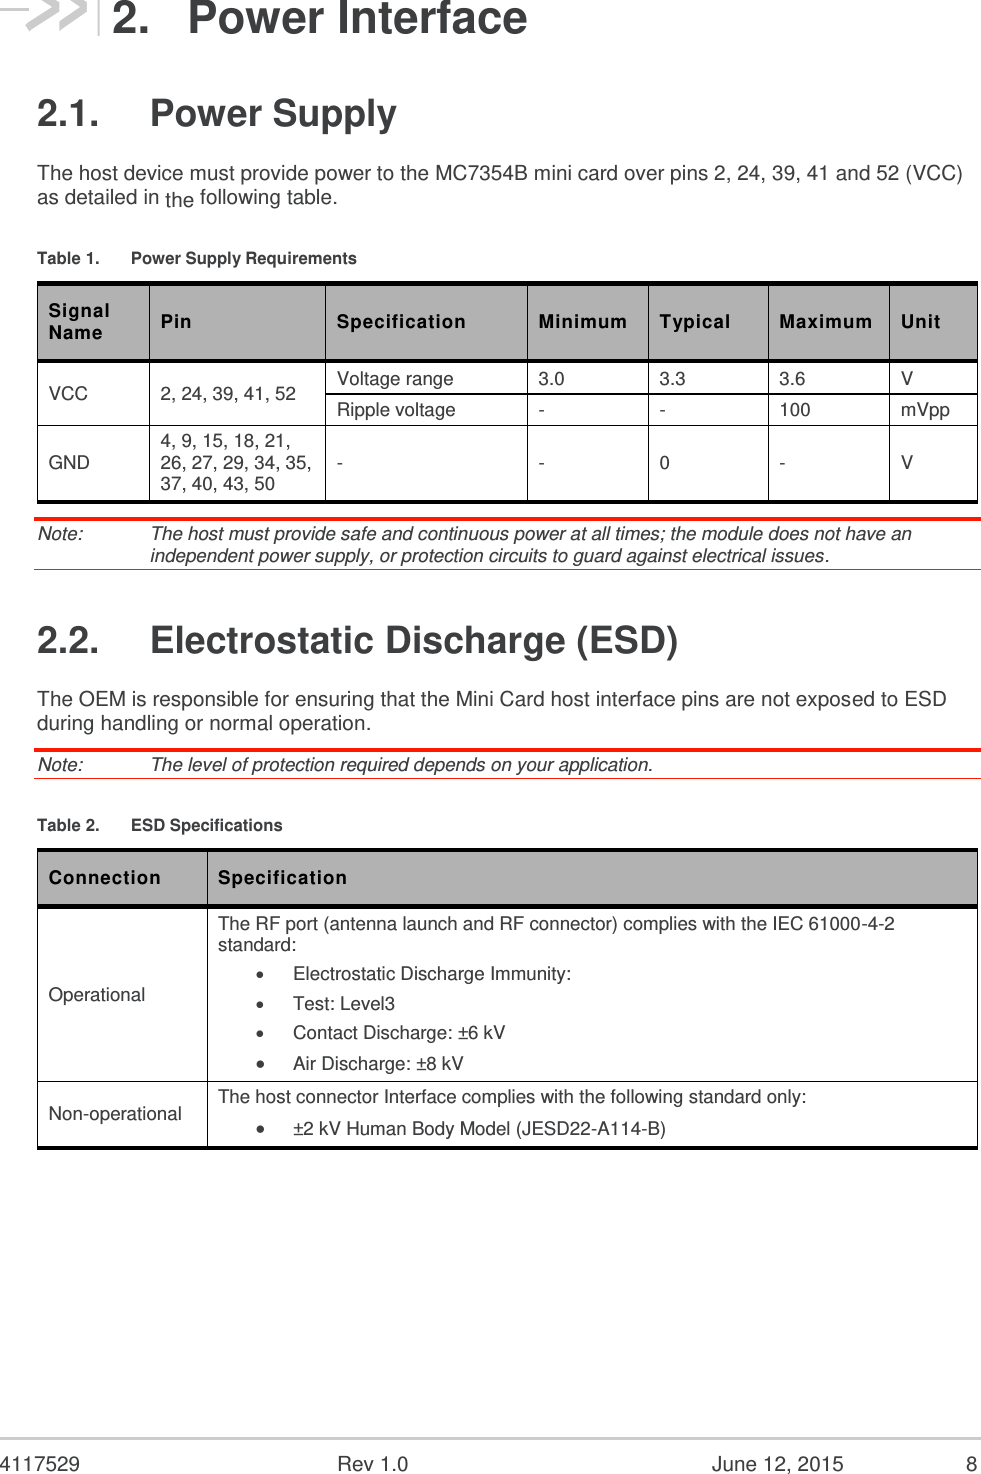  4117529  Rev 1.0  June 12, 2015  8 2.  Power Interface 2.1.  Power Supply The host device must provide power to the MC7354B mini card over pins 2, 24, 39, 41 and 52 (VCC) as detailed in the following table. Table 1.  Power Supply Requirements Signal Name Pin Specification Minimum Typical Maximum Unit VCC 2, 24, 39, 41, 52 Voltage range 3.0 3.3 3.6 V Ripple voltage - - 100 mVpp GND 4, 9, 15, 18, 21, 26, 27, 29, 34, 35, 37, 40, 43, 50 - - 0 - V Note:   The host must provide safe and continuous power at all times; the module does not have an independent power supply, or protection circuits to guard against electrical issues. 2.2.  Electrostatic Discharge (ESD) The OEM is responsible for ensuring that the Mini Card host interface pins are not exposed to ESD during handling or normal operation. Note:   The level of protection required depends on your application. Table 2.  ESD Specifications Connection Specification Operational The RF port (antenna launch and RF connector) complies with the IEC 61000-4-2 standard:  Electrostatic Discharge Immunity:   Test: Level3   Contact Discharge: ±6 kV  Air Discharge: ±8 kV  Non-operational The host connector Interface complies with the following standard only:  ±2 kV Human Body Model (JESD22-A114-B)    